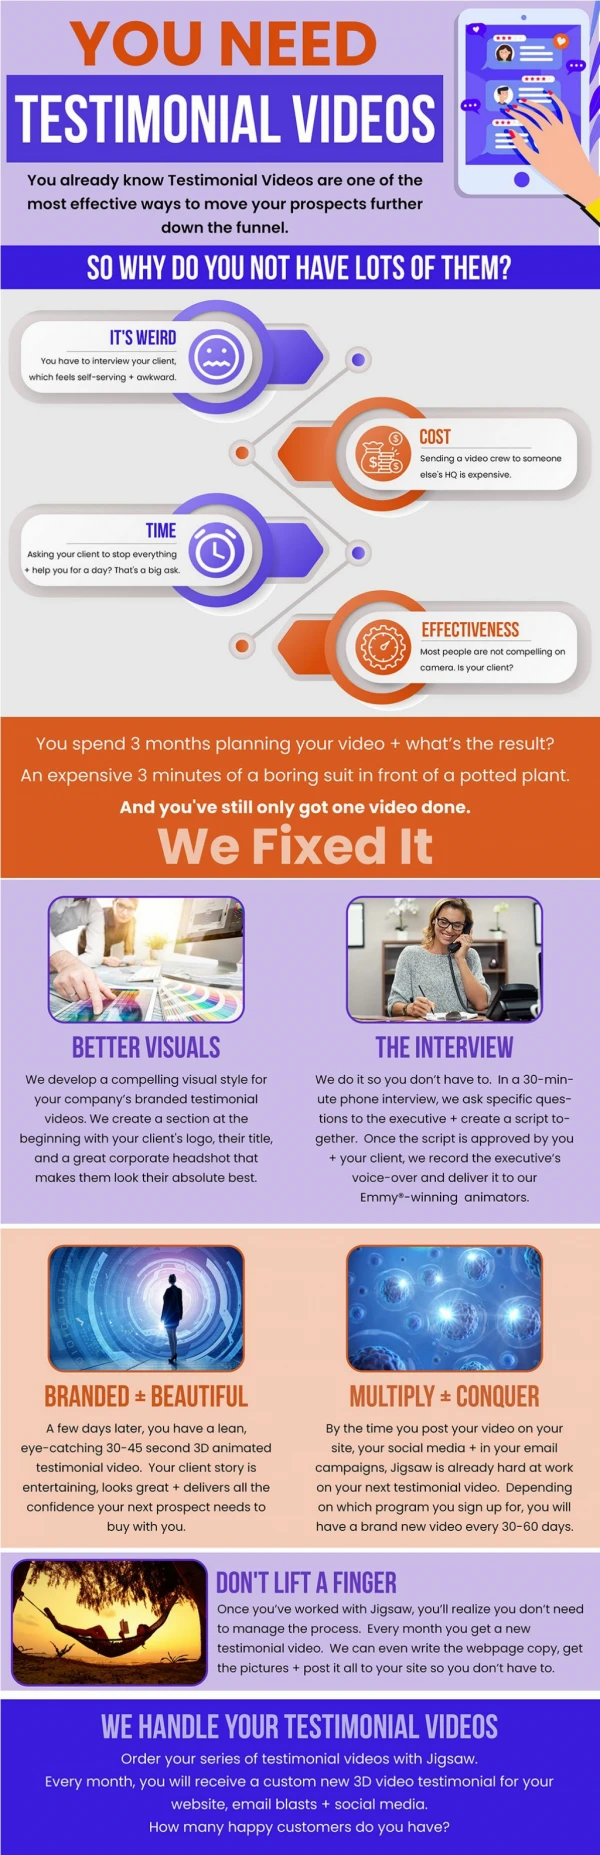 Testimonial Video Production by Jigsaw Marketing [Infographic]